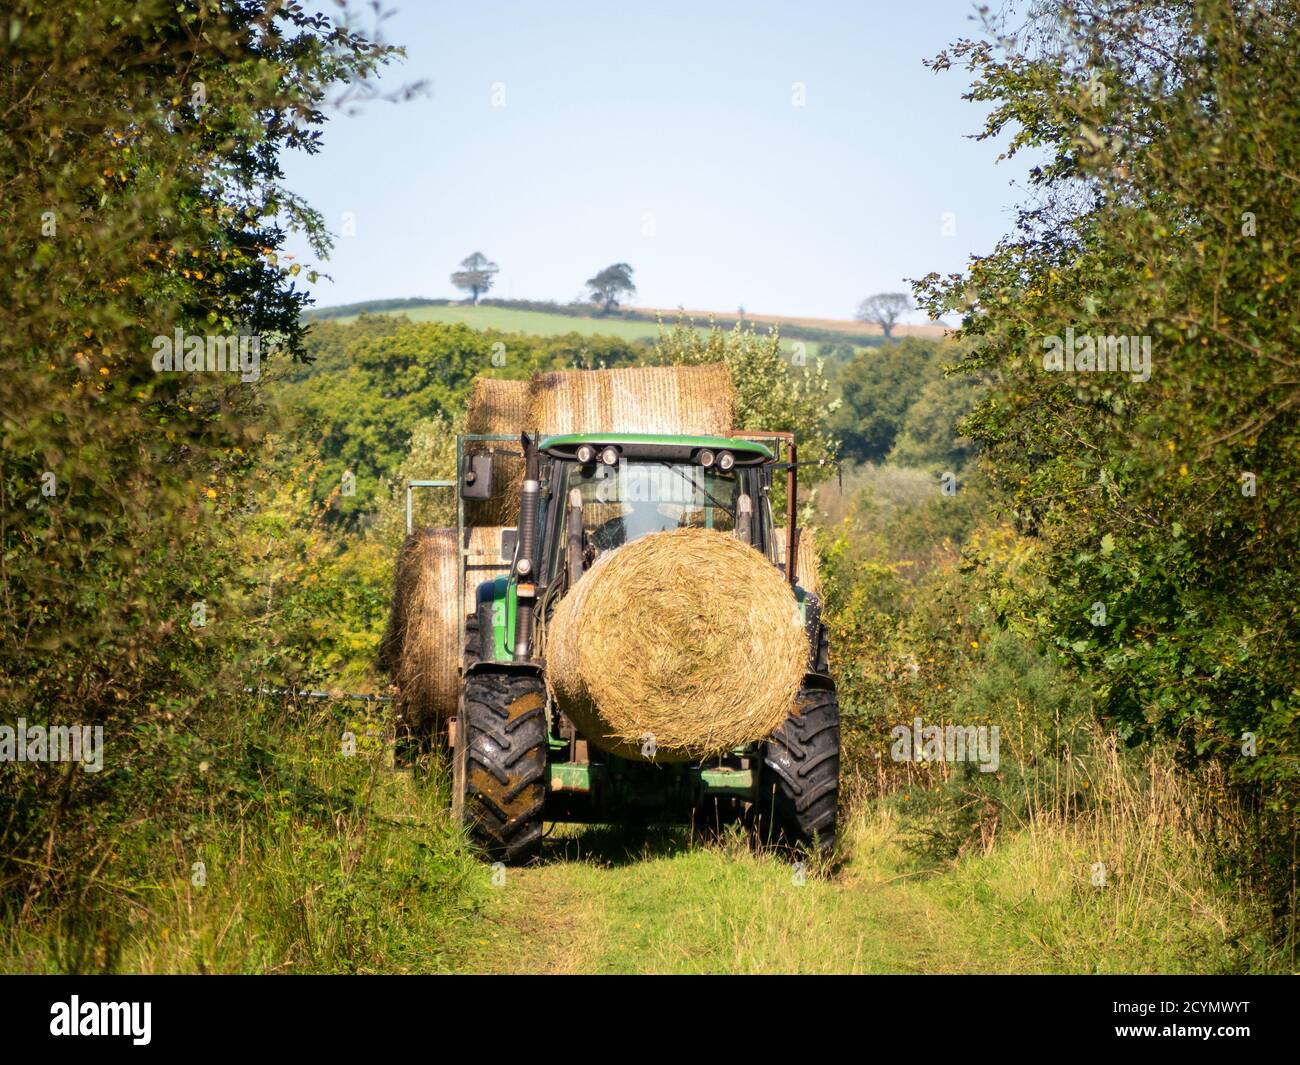 Autumn in nature, with tractor. Devon, UK. Hay bales. Stock Photo